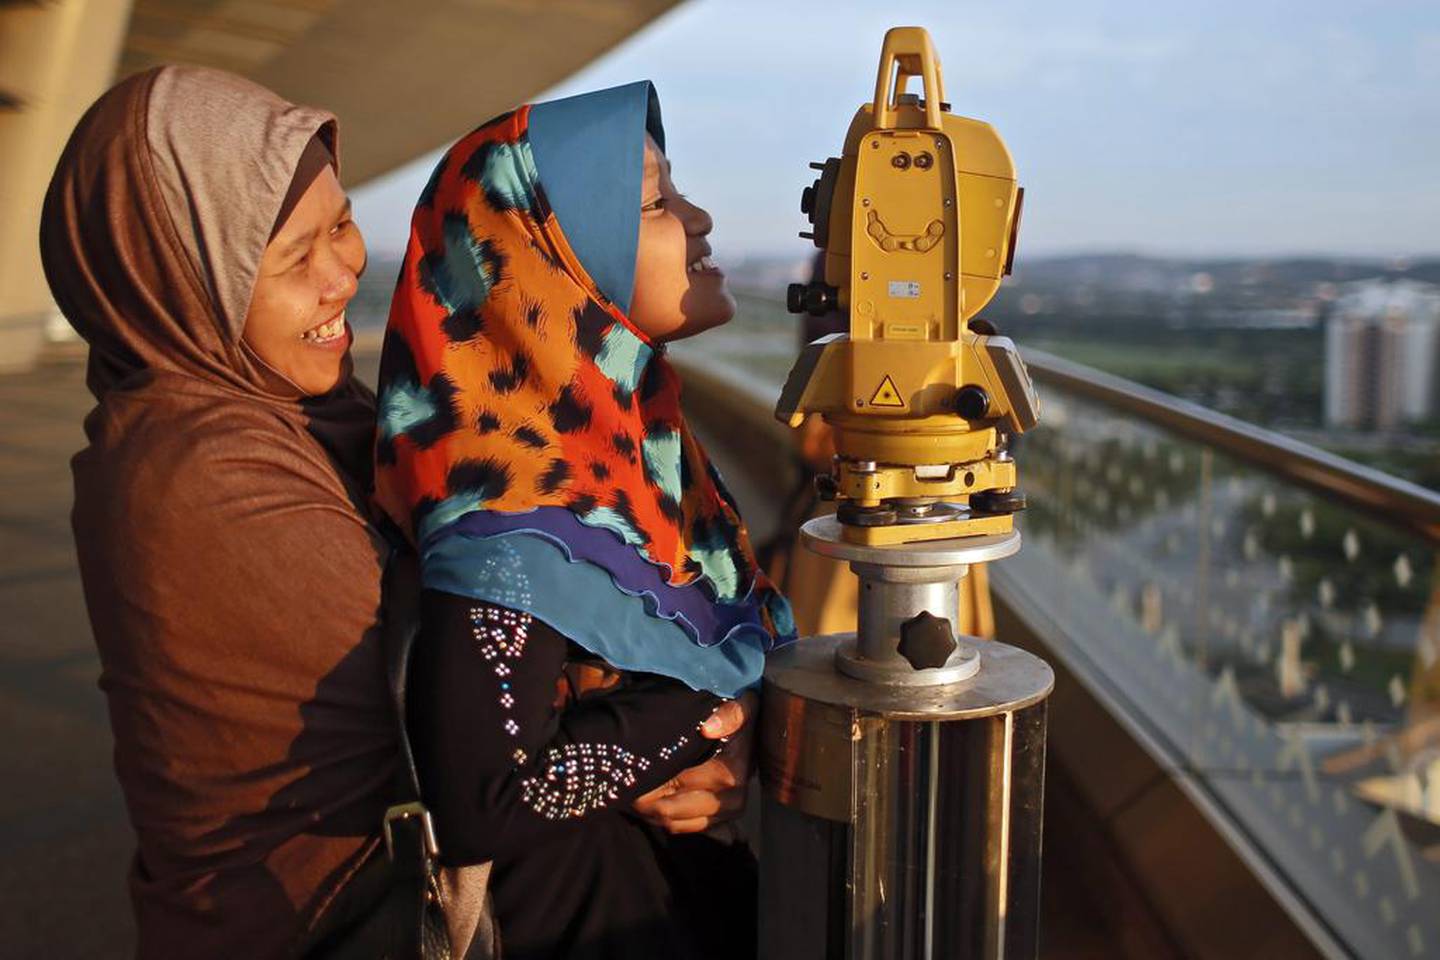 A mother and daughter look through a telescope to determine the sighting of the new moon to mark the start of the fasting month of Ramadan in Putrajaya, outside Kuala Lumpur, Malaysia, on June 15, 2021. EPA